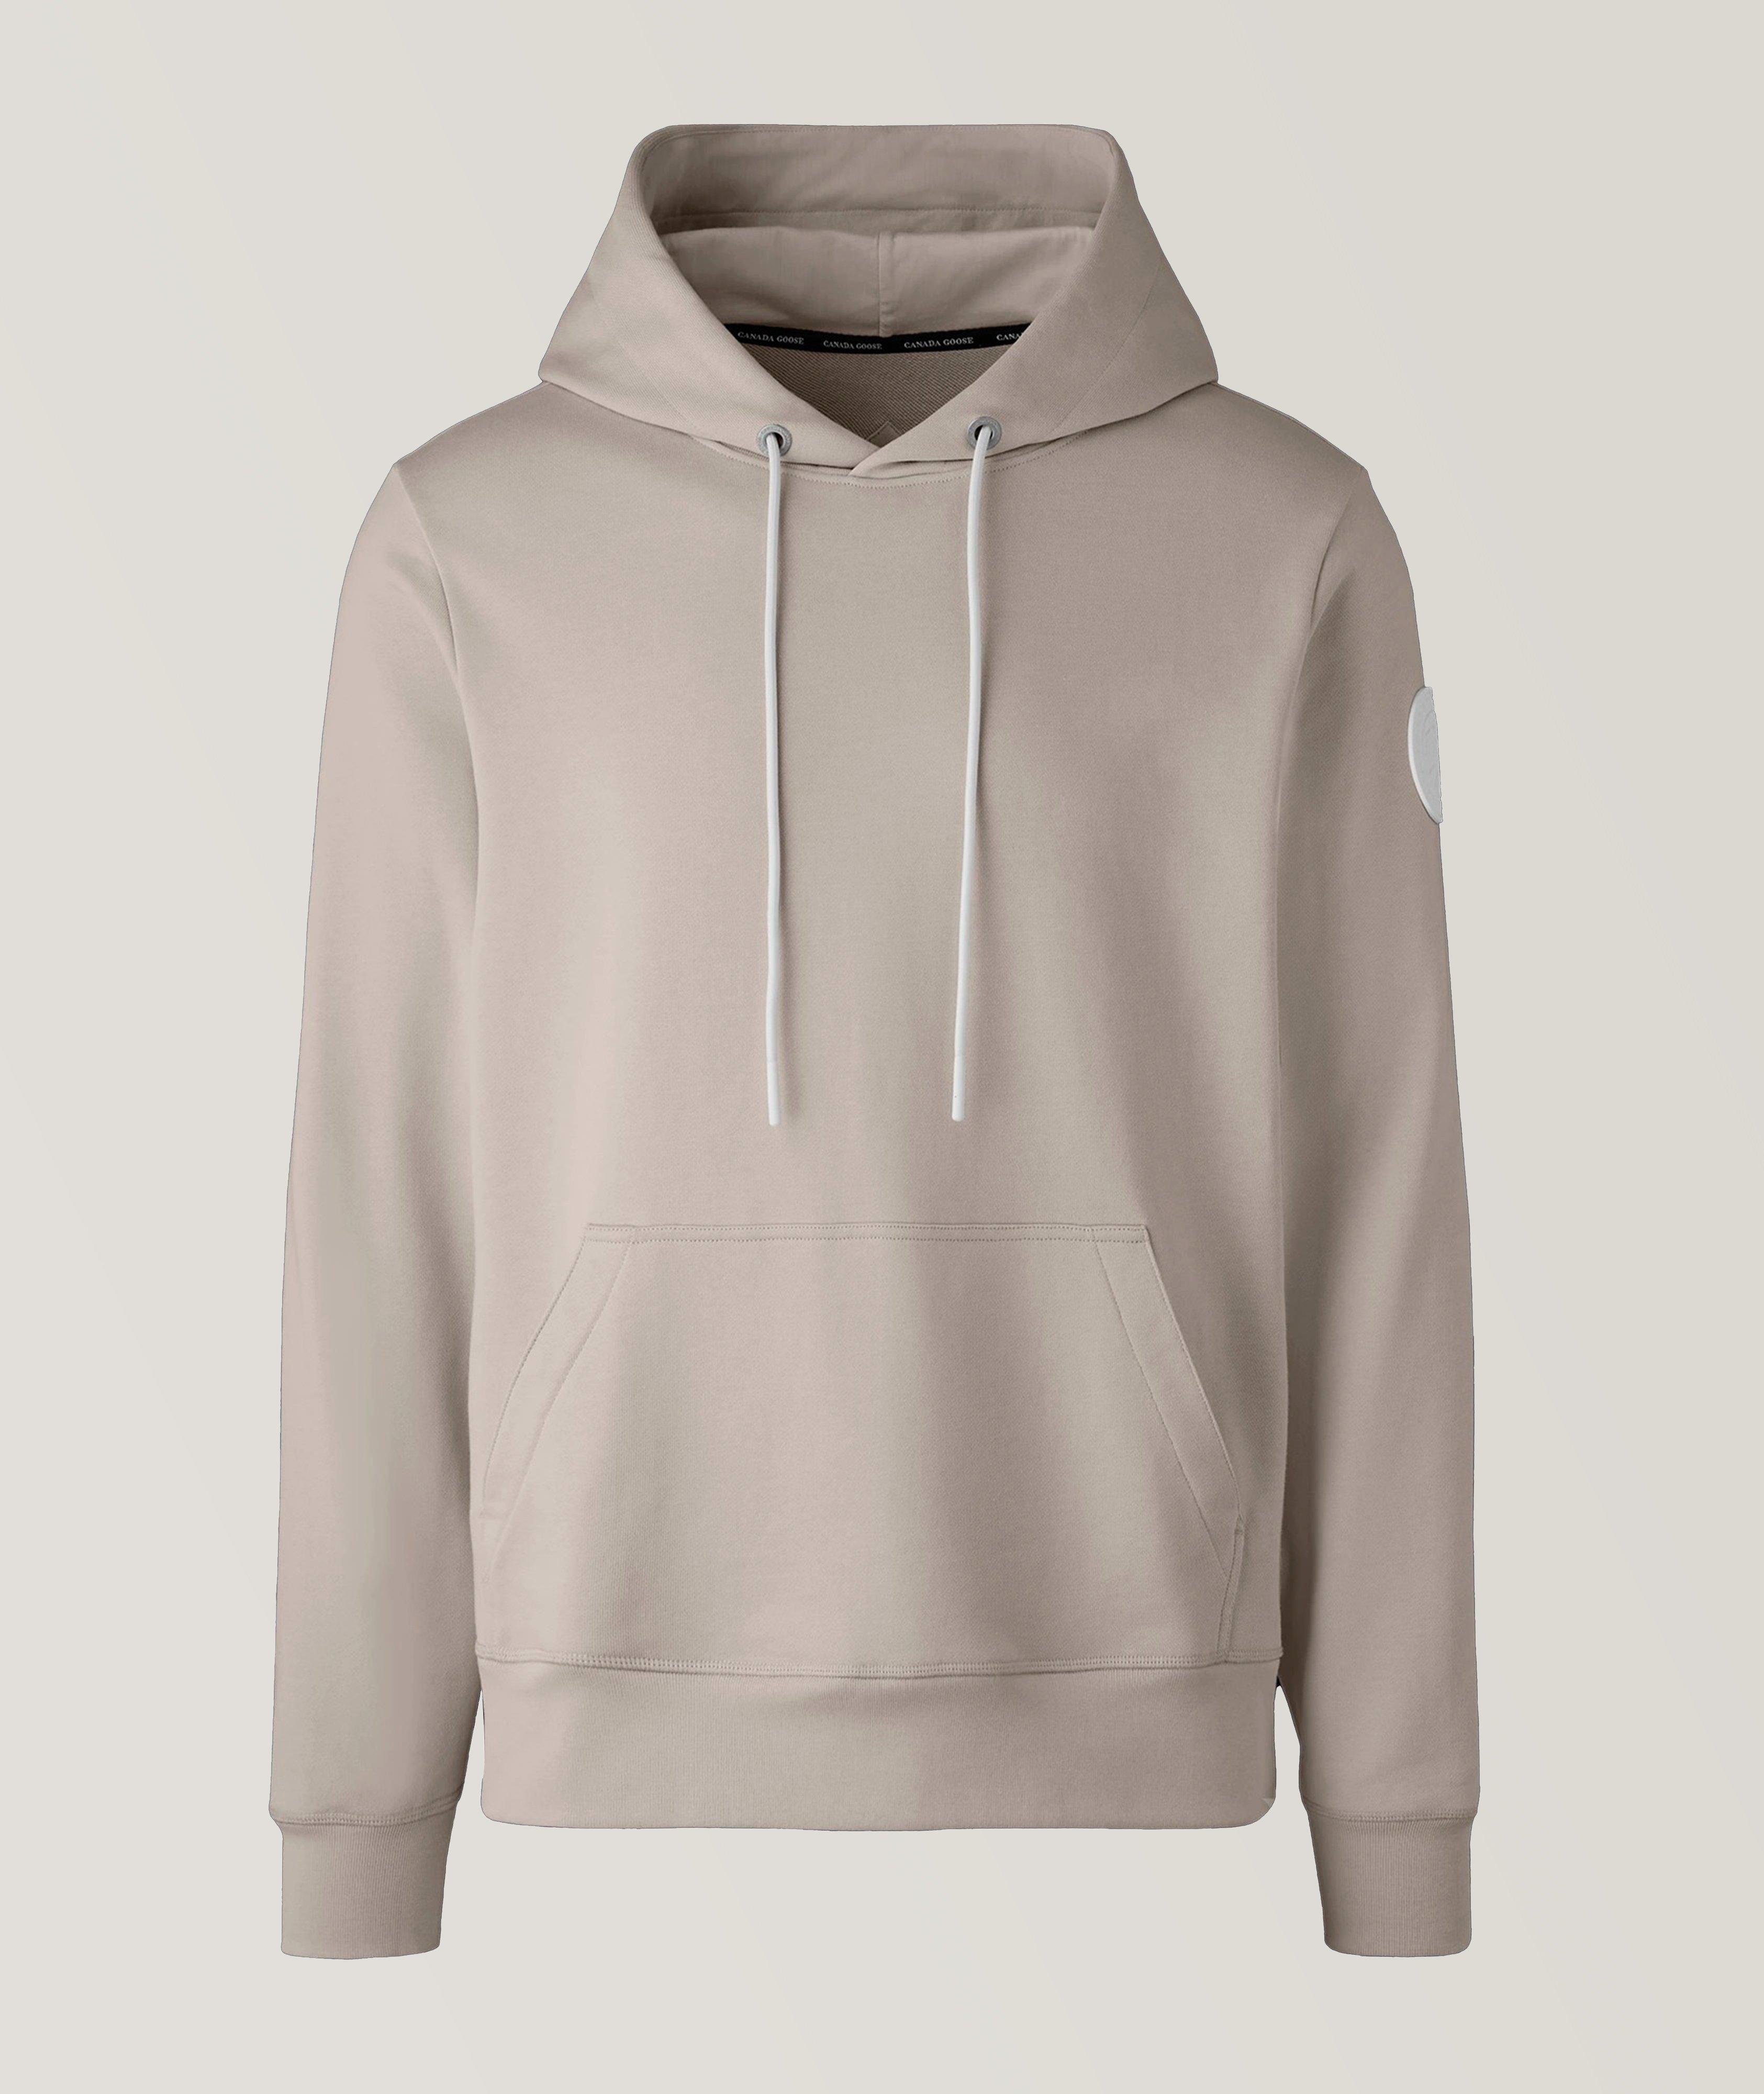 Pastel Collection Huron Hooded Sweater image 0